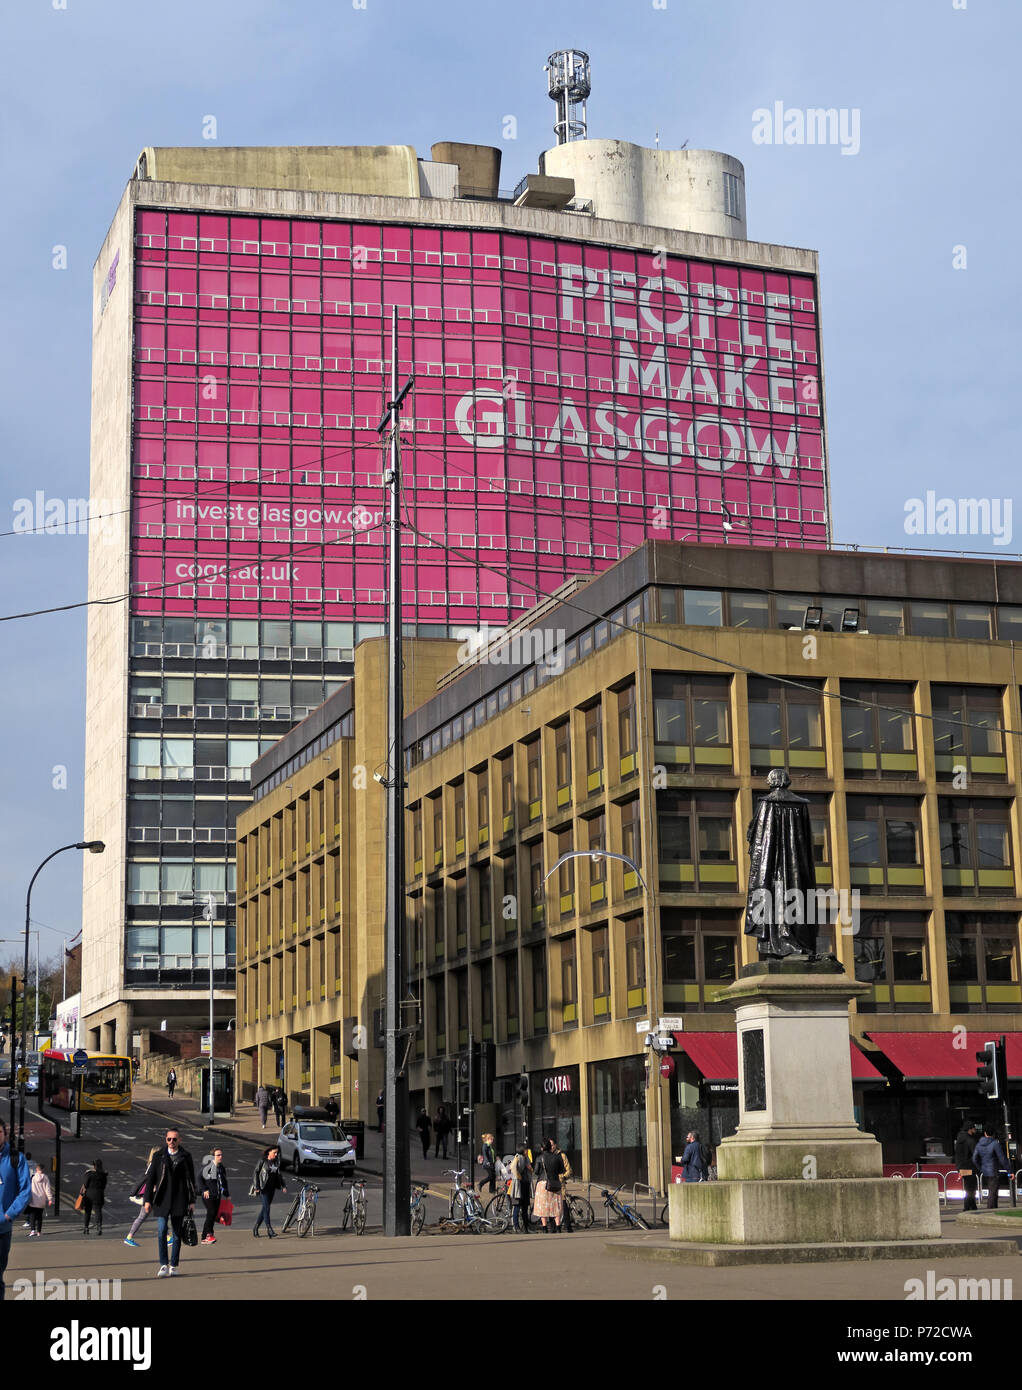 People Make Glasgow in pink, Glasgow City Brand, Strathclyde University, Met Tower, city centre, Scotland, UK Stock Photo